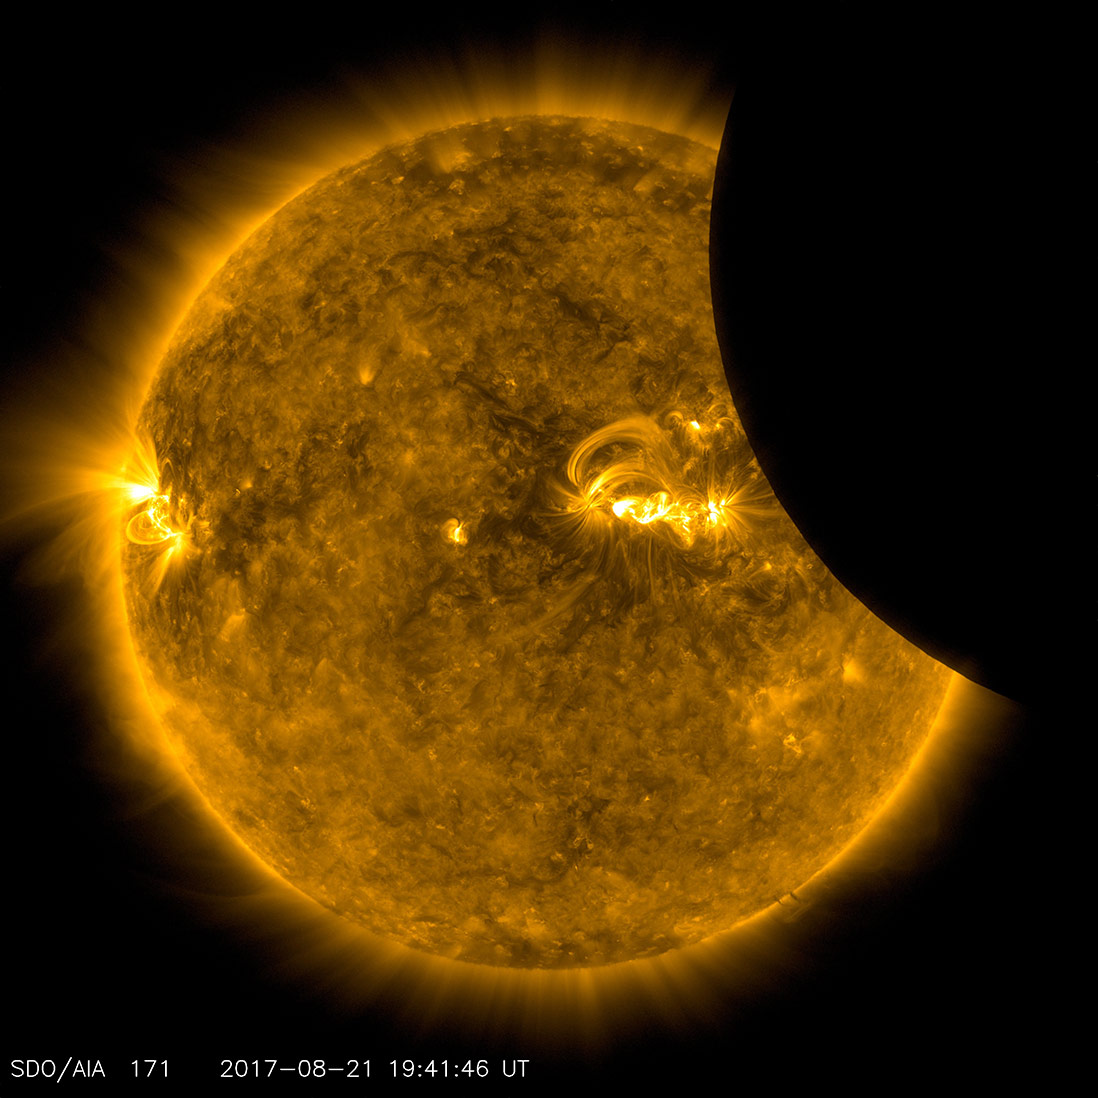 Image of the Moon transiting across the Sun, taken by SDO in 171 ångstrom extreme ultraviolet light on August 21, 2017. Credit: NASA/SDO